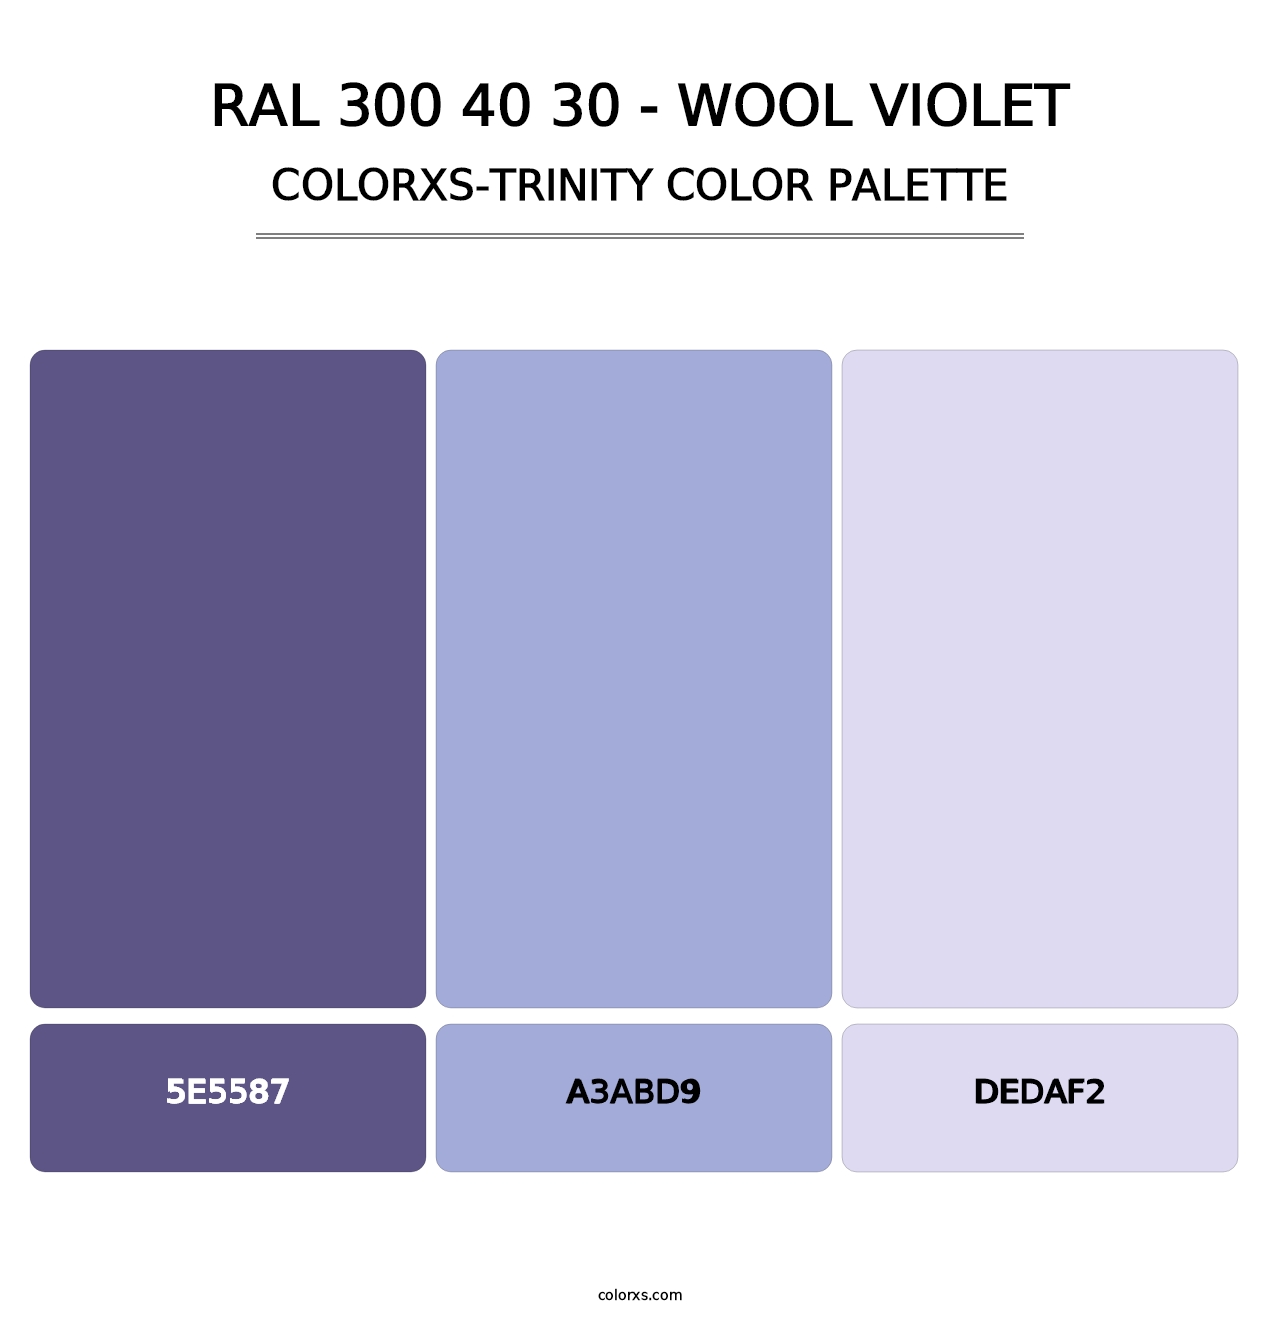 RAL 300 40 30 - Wool Violet - Colorxs Trinity Palette